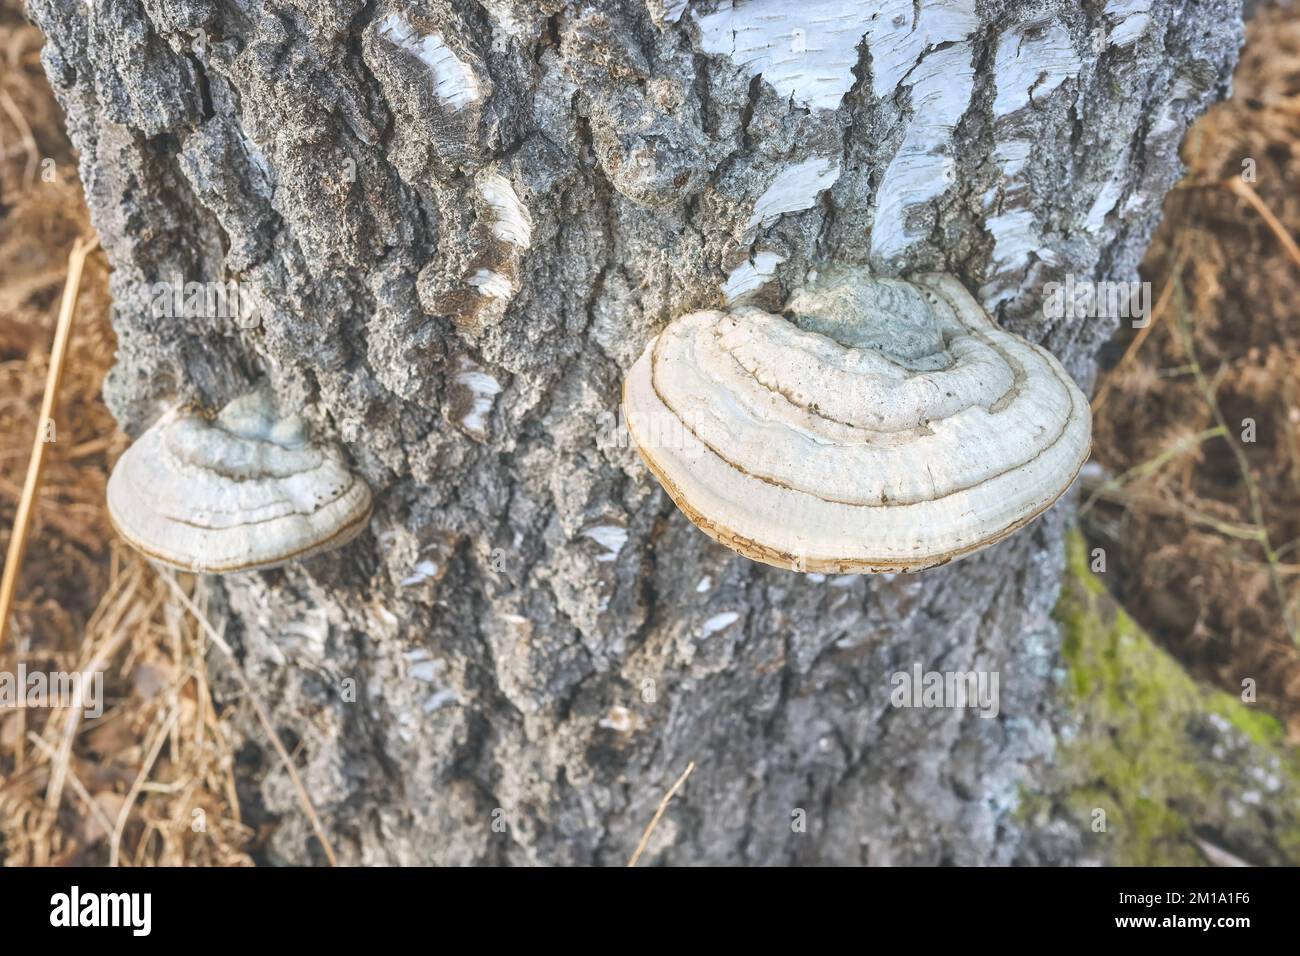 Close up picture of polypores growing on a birch trunk, selective focus. Stock Photo